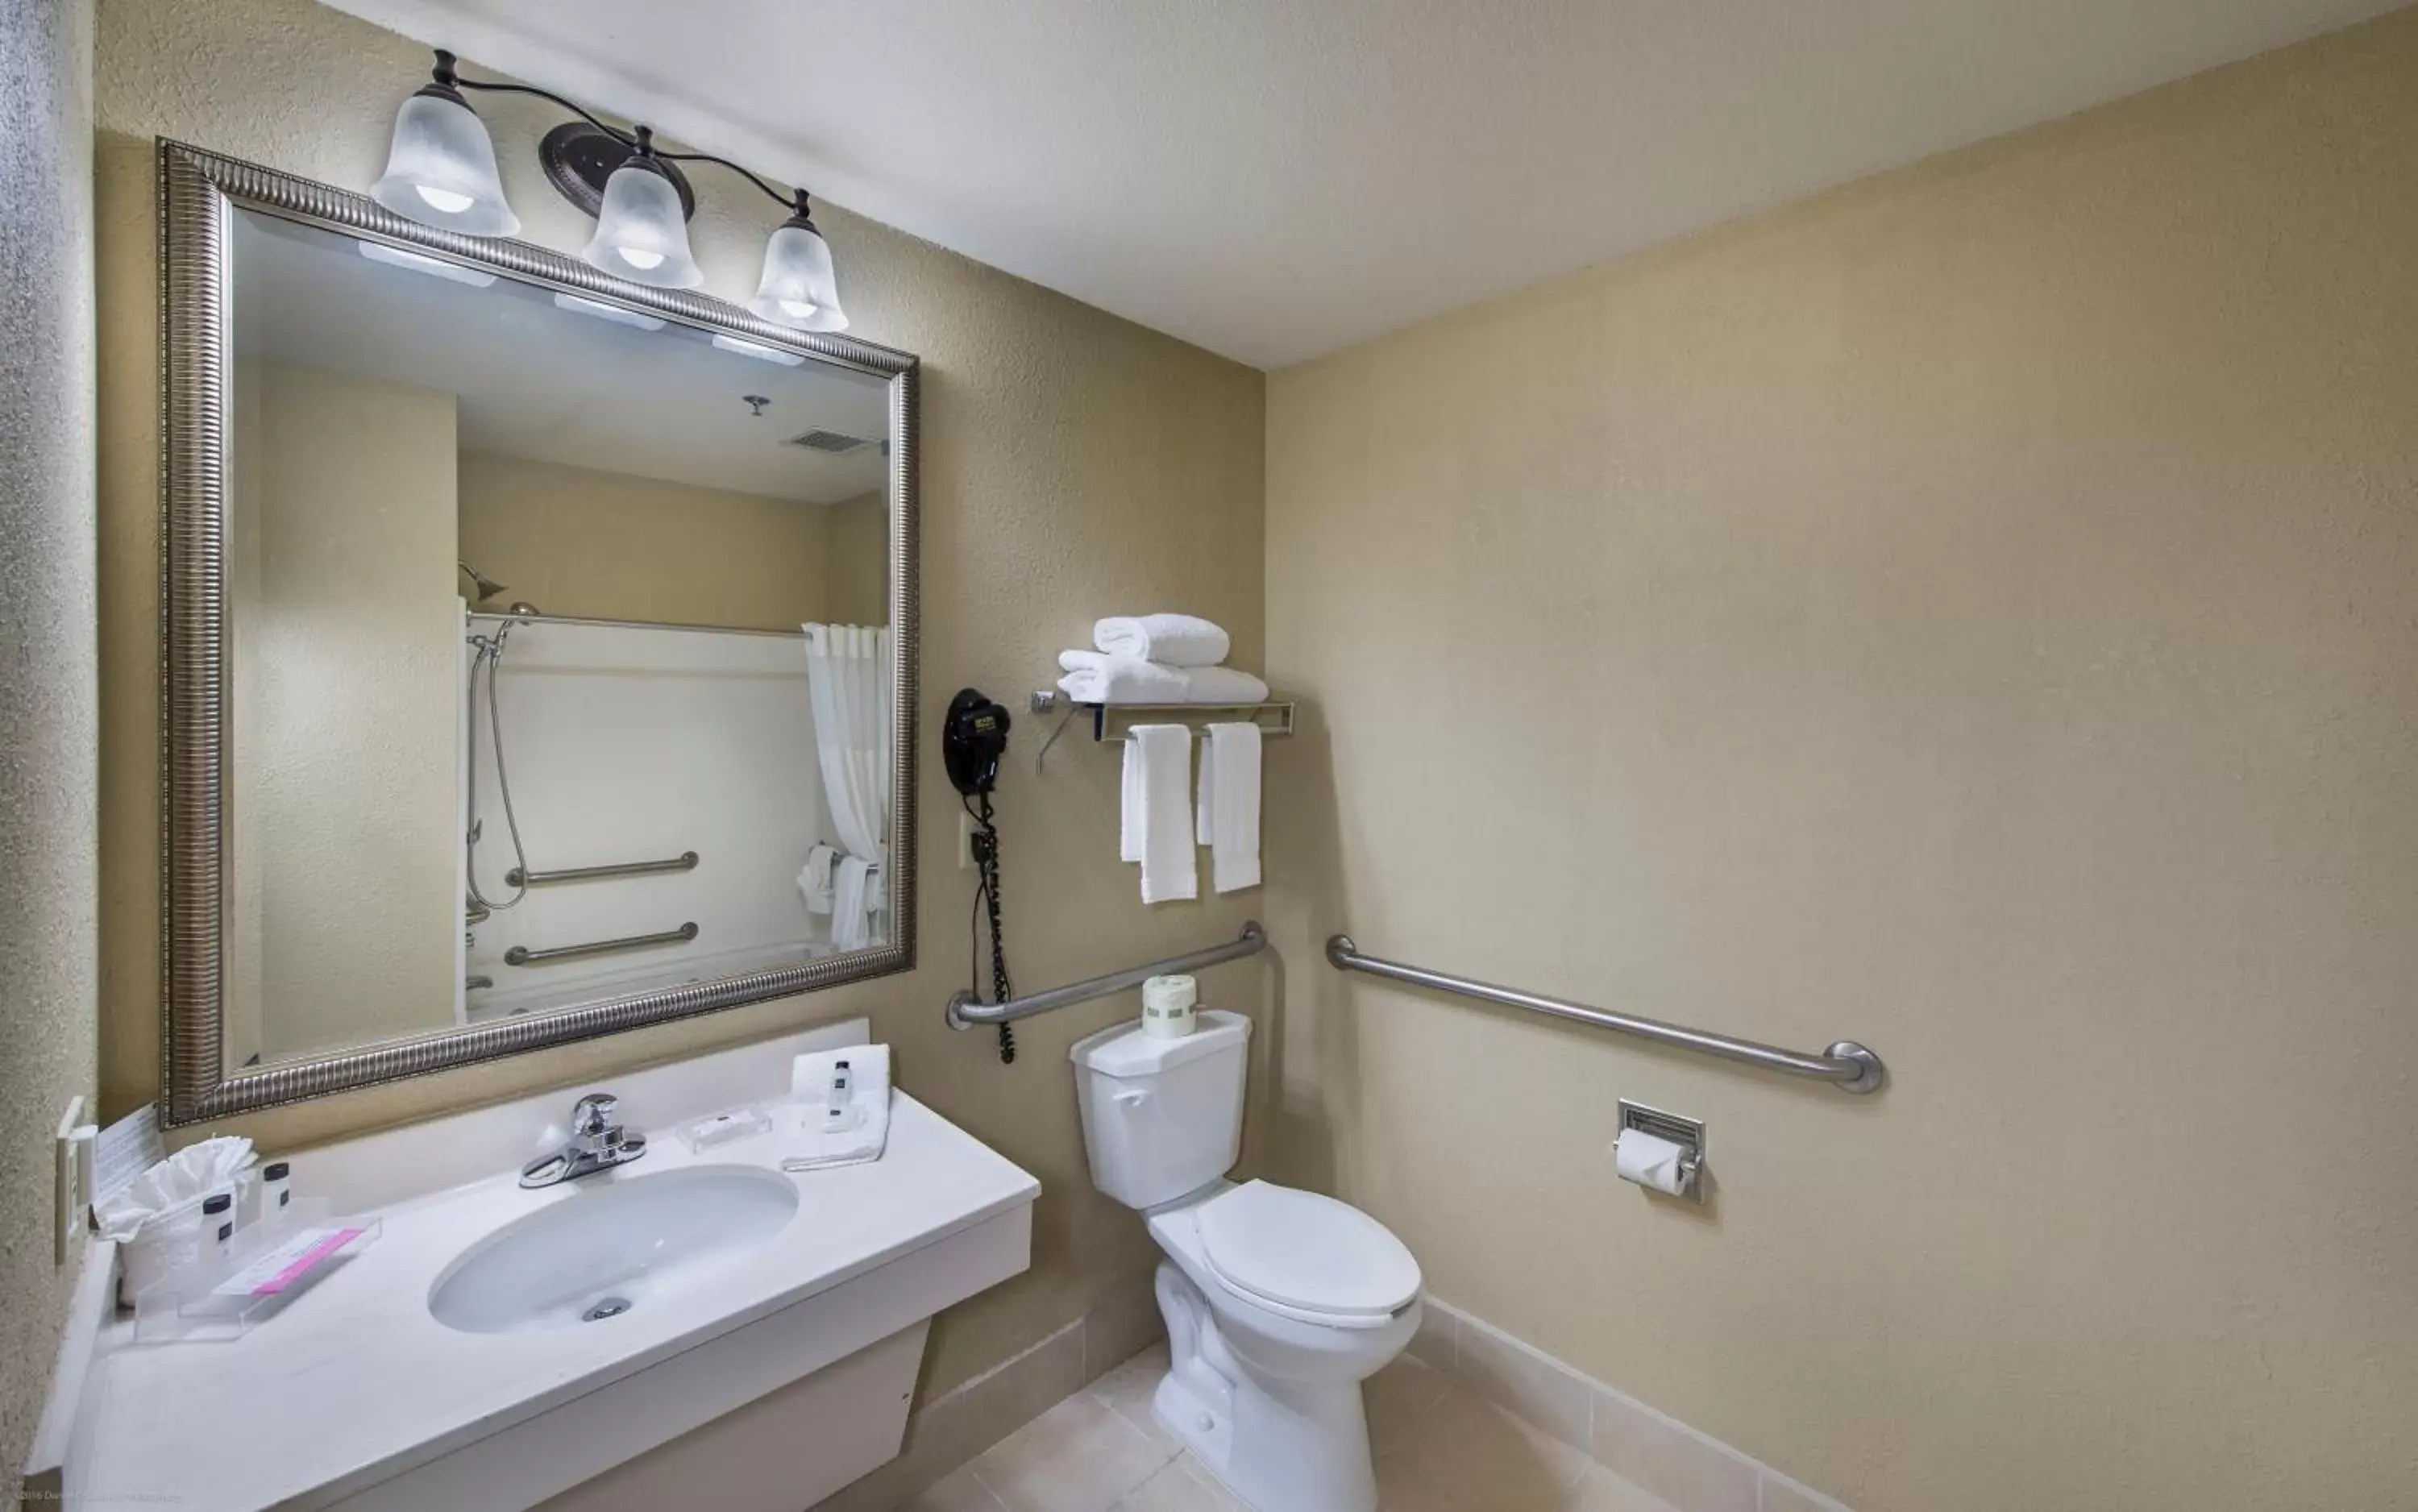 Bathroom in Country Inn & Suites by Radisson, Greeley, CO